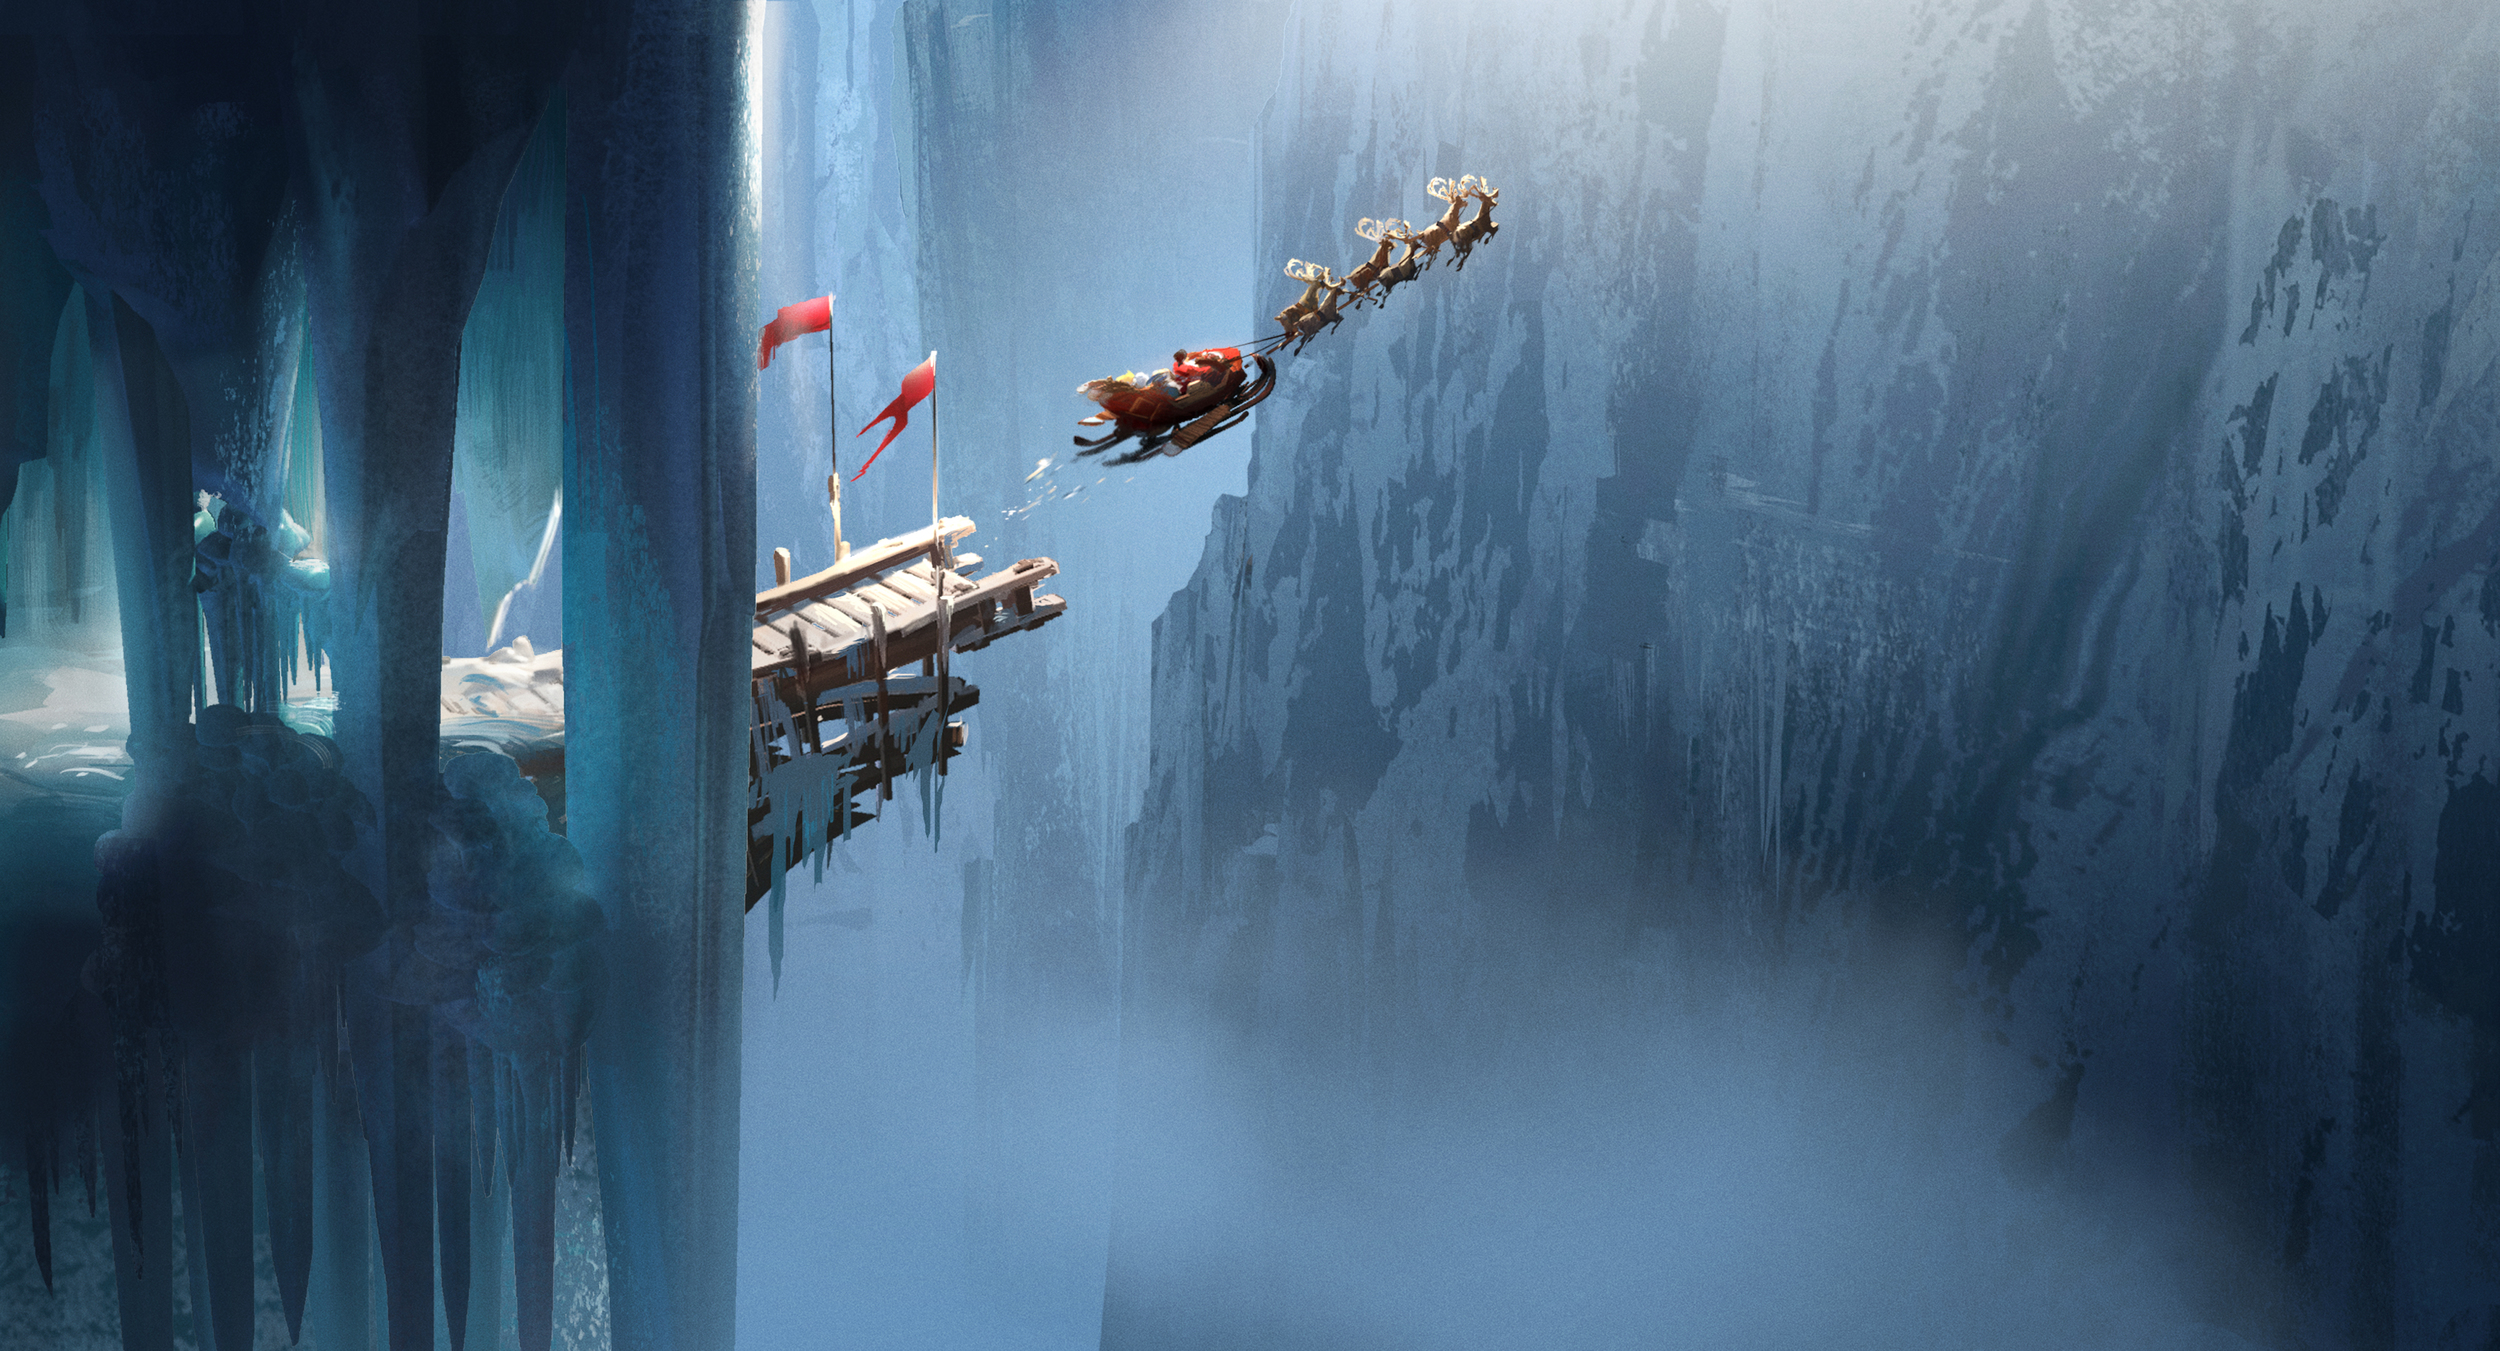  Rise of The Guardians, DWA Concept painting - North pole location 